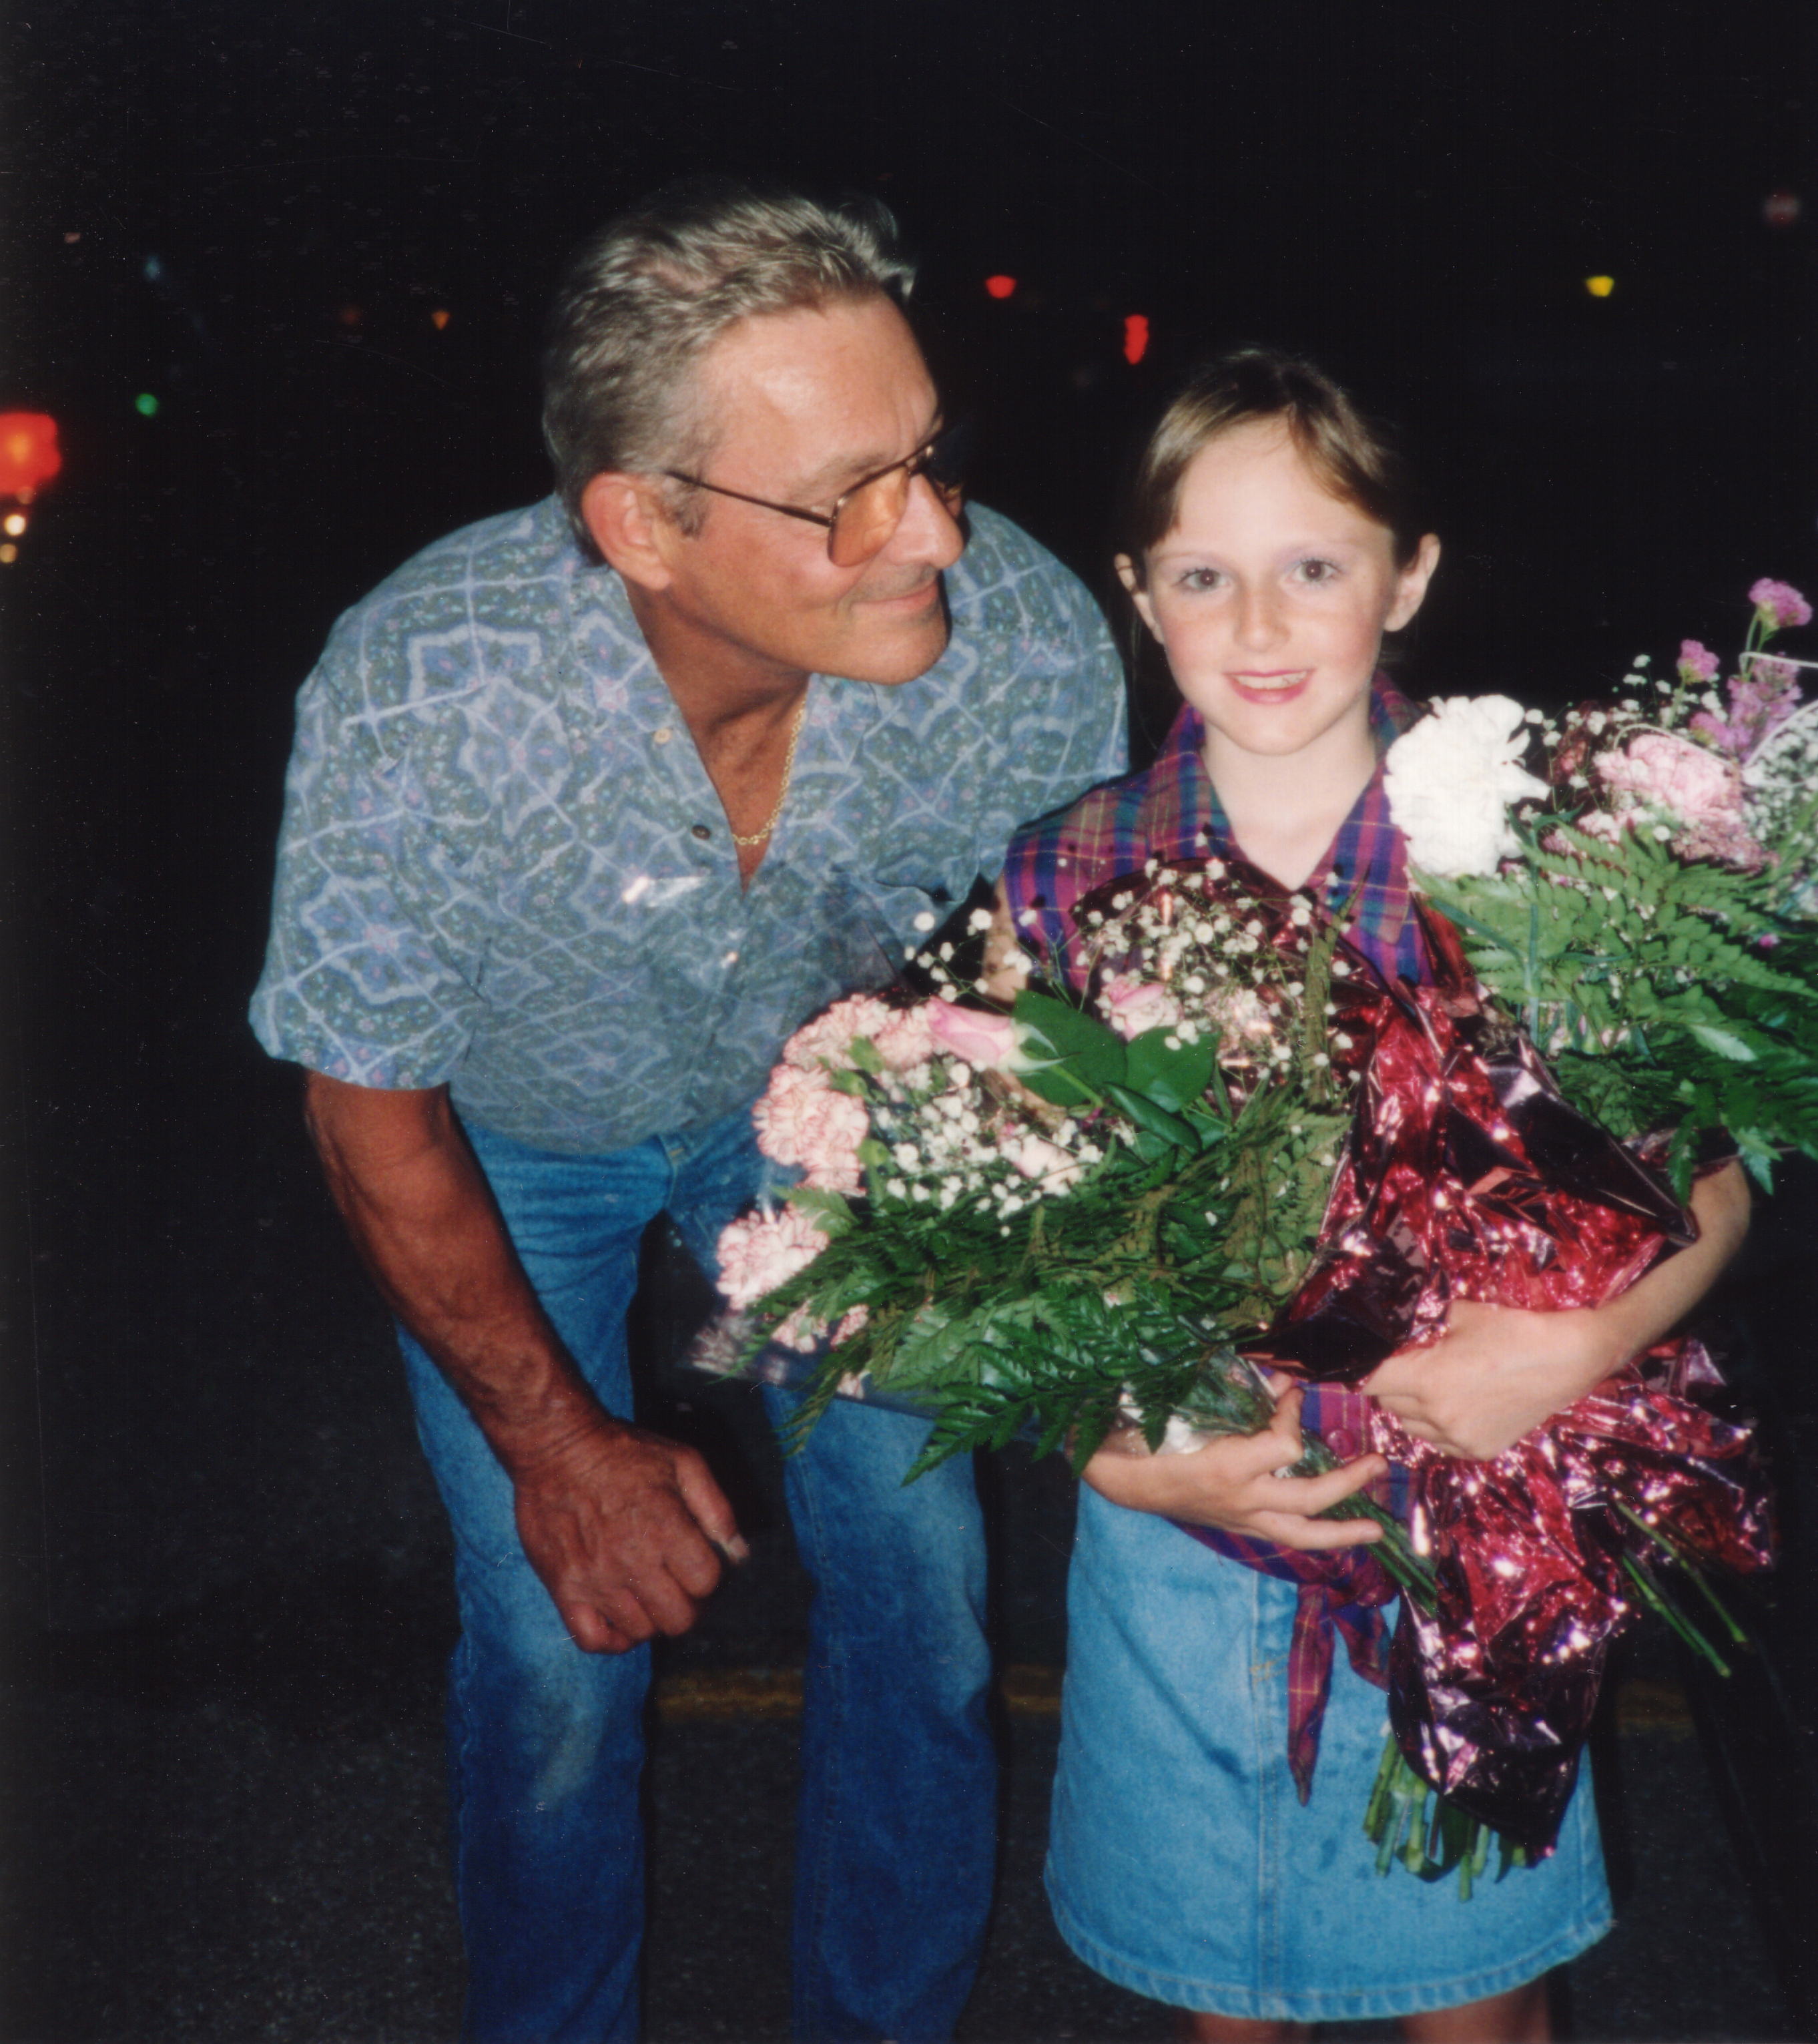 Older man in glasses smiling at young girl holding flowers. They stand close, sharing a happy moment